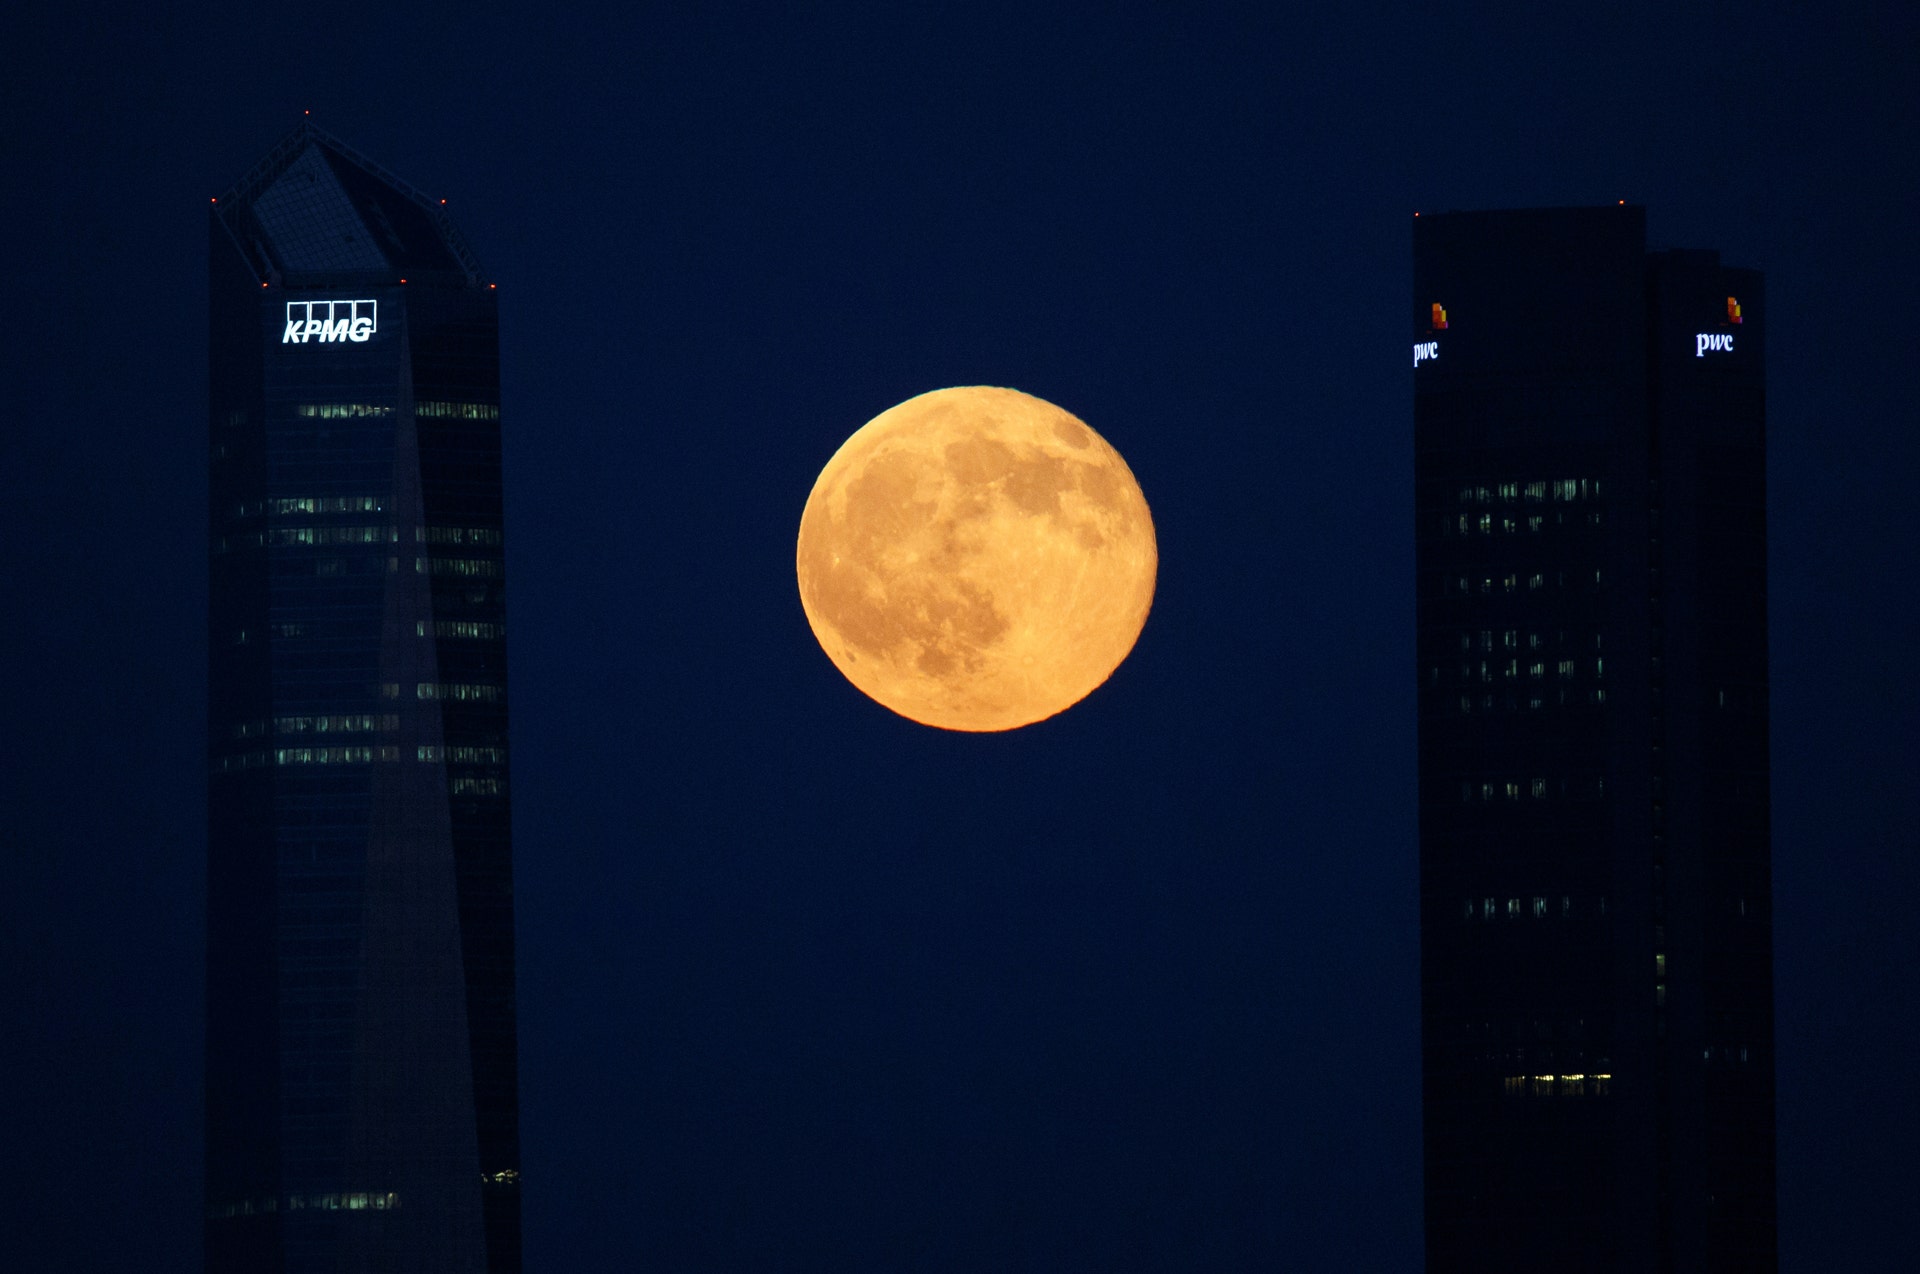 When to view July's full buck moon